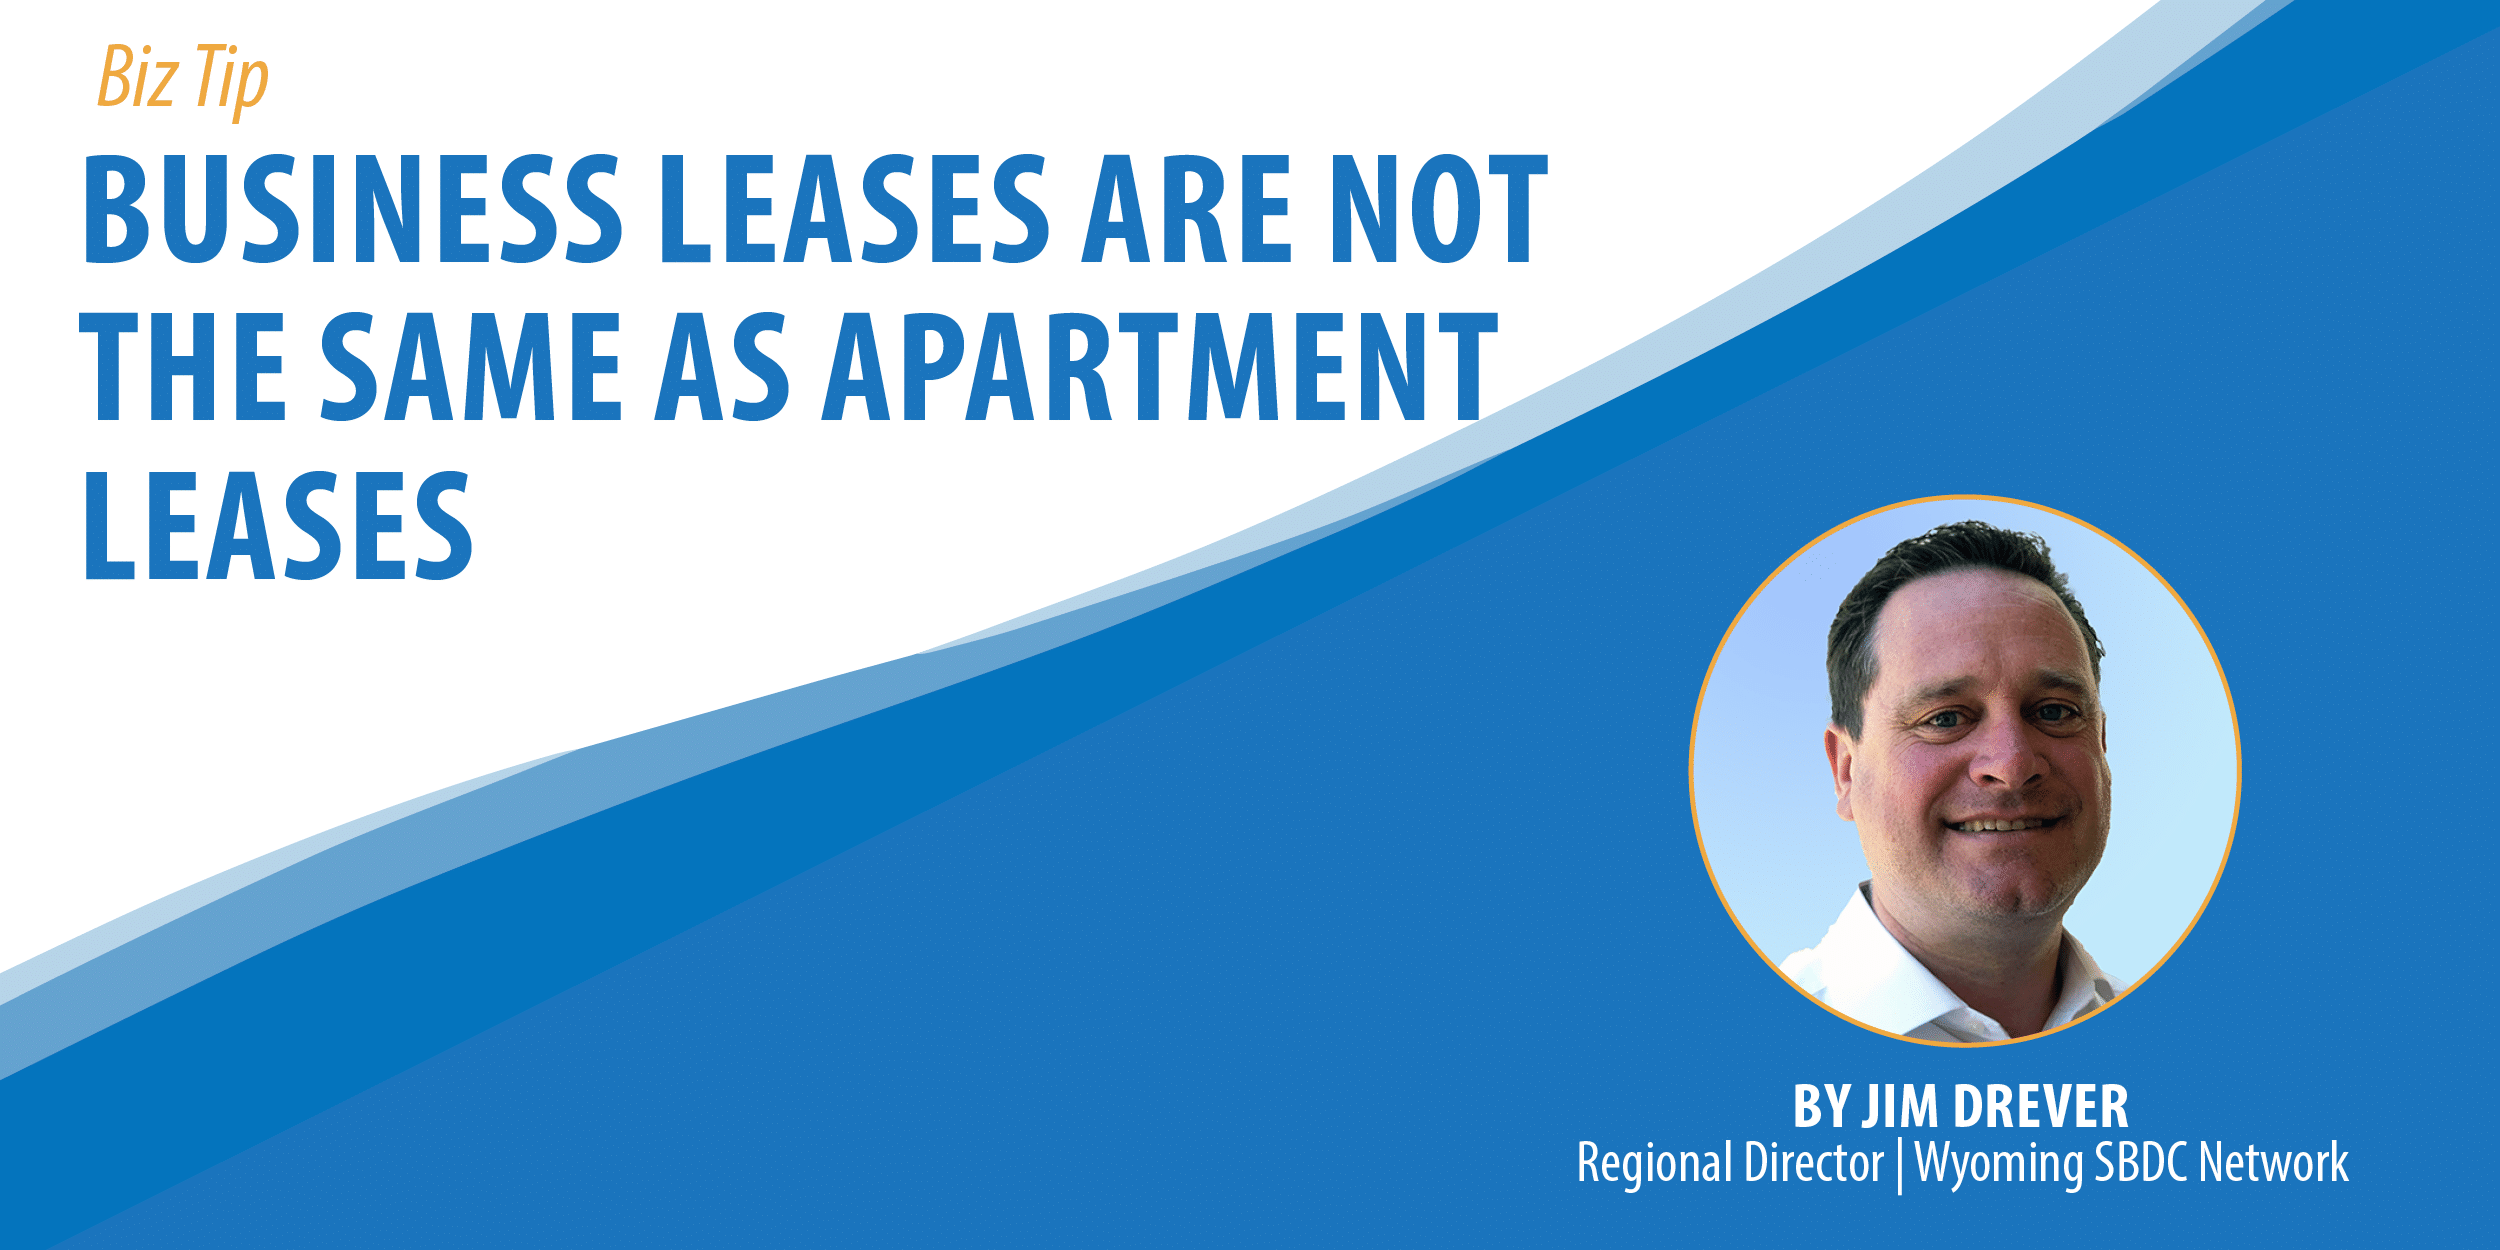 Business Leases Are Not the Same as Apartment Leases